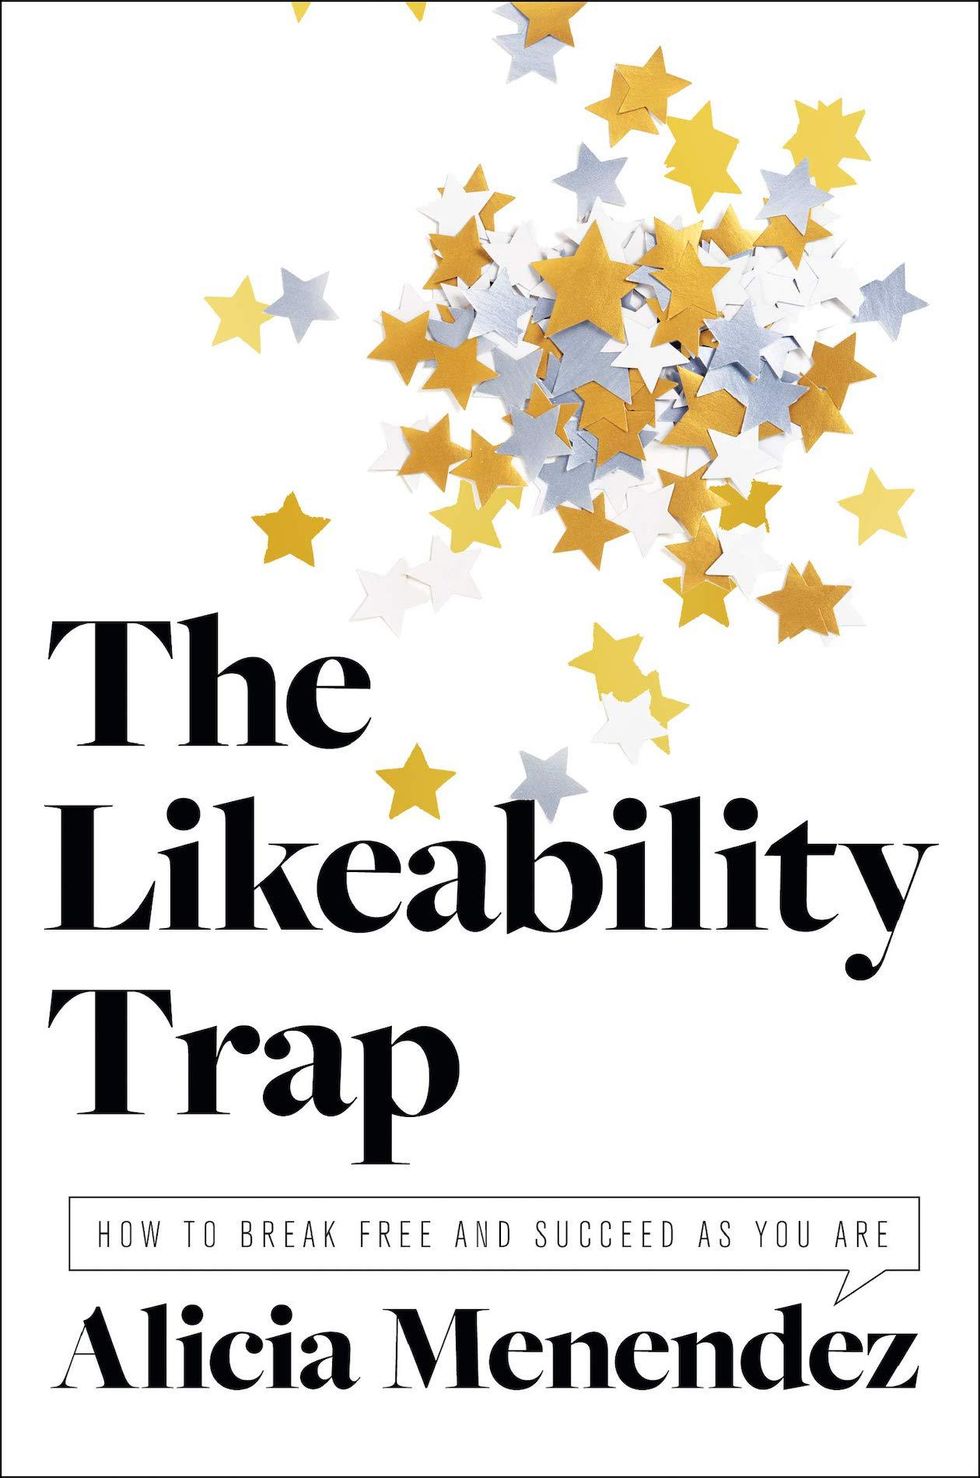 The Likeability Trap: How to Break Free and Succeed as You Are by Alicia Menendez